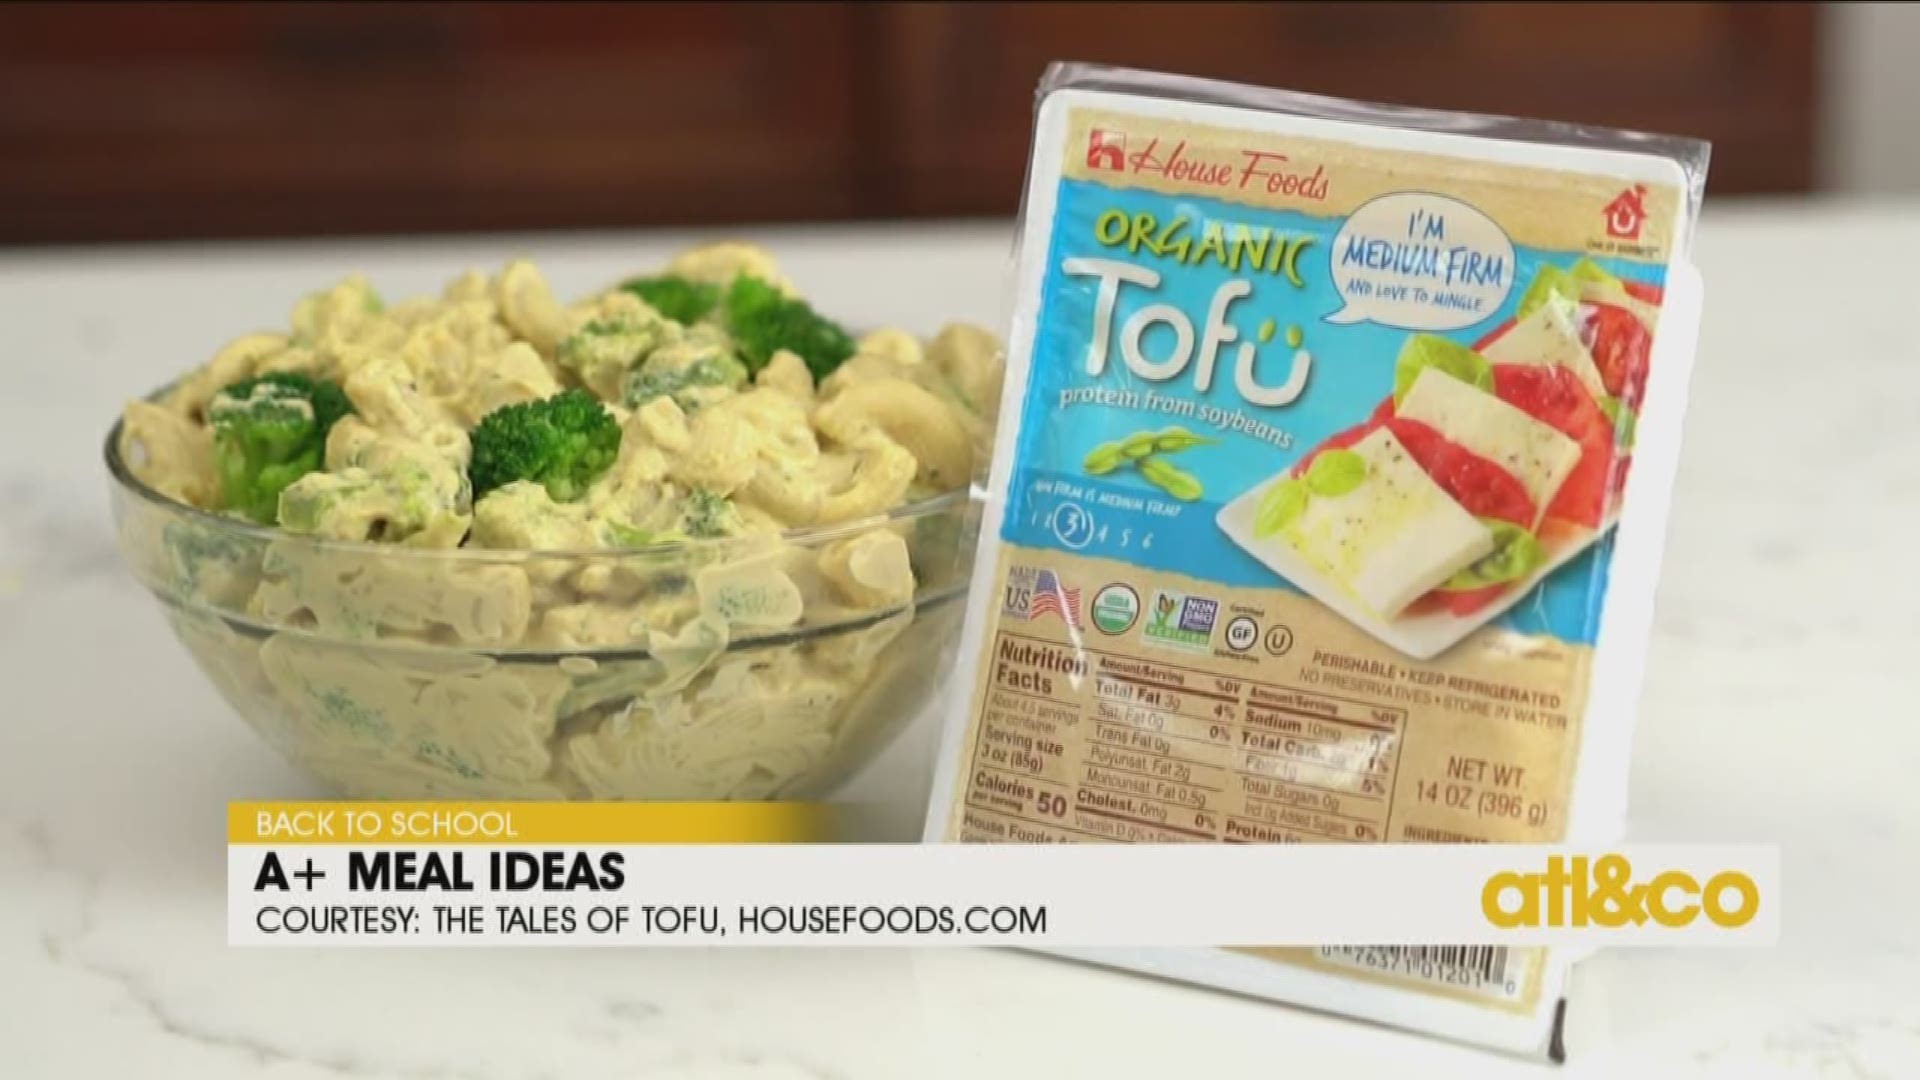 Lifestyle expert Limor Suss shares A+ ideas for breakfast, lunch, and after school snacks!